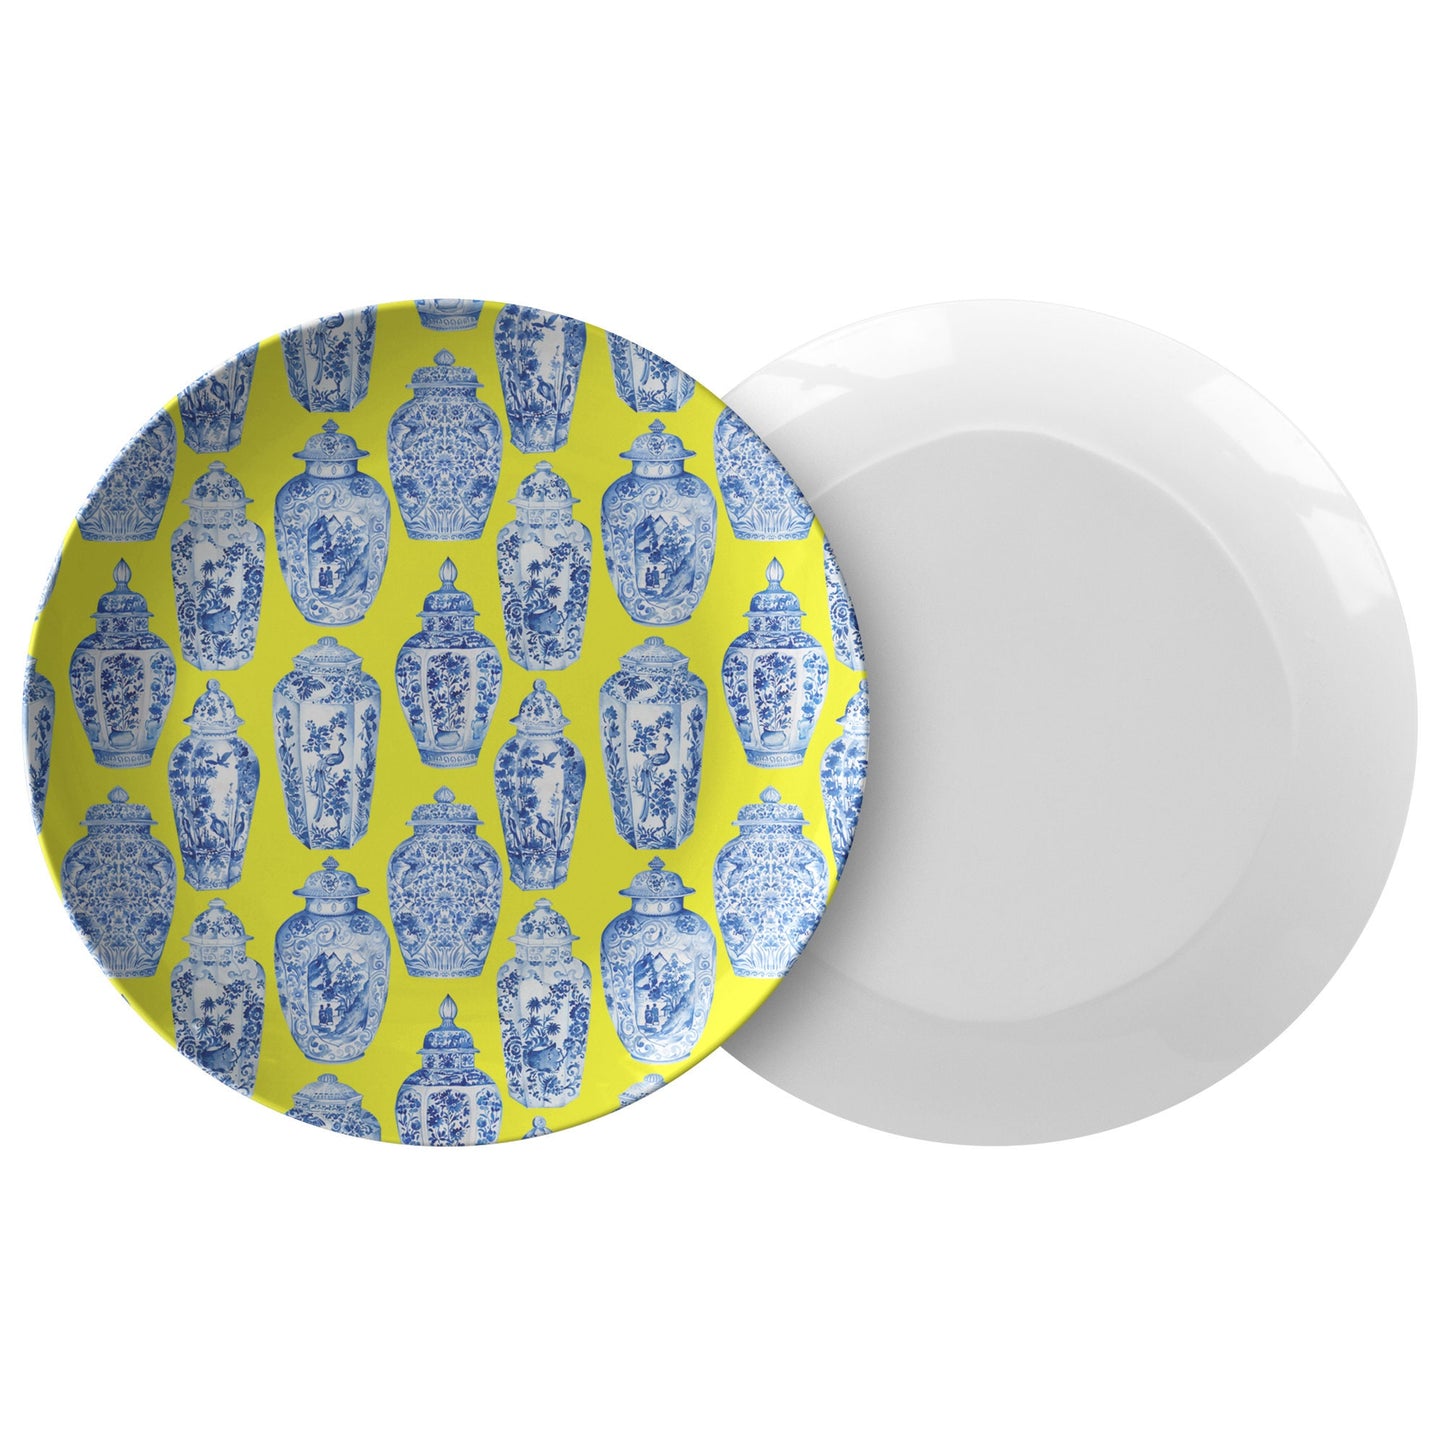 Chinoiserie Ginger Jar Plates, Set of 4, Yellow & Blue, Luxury Thermosaf Plastic